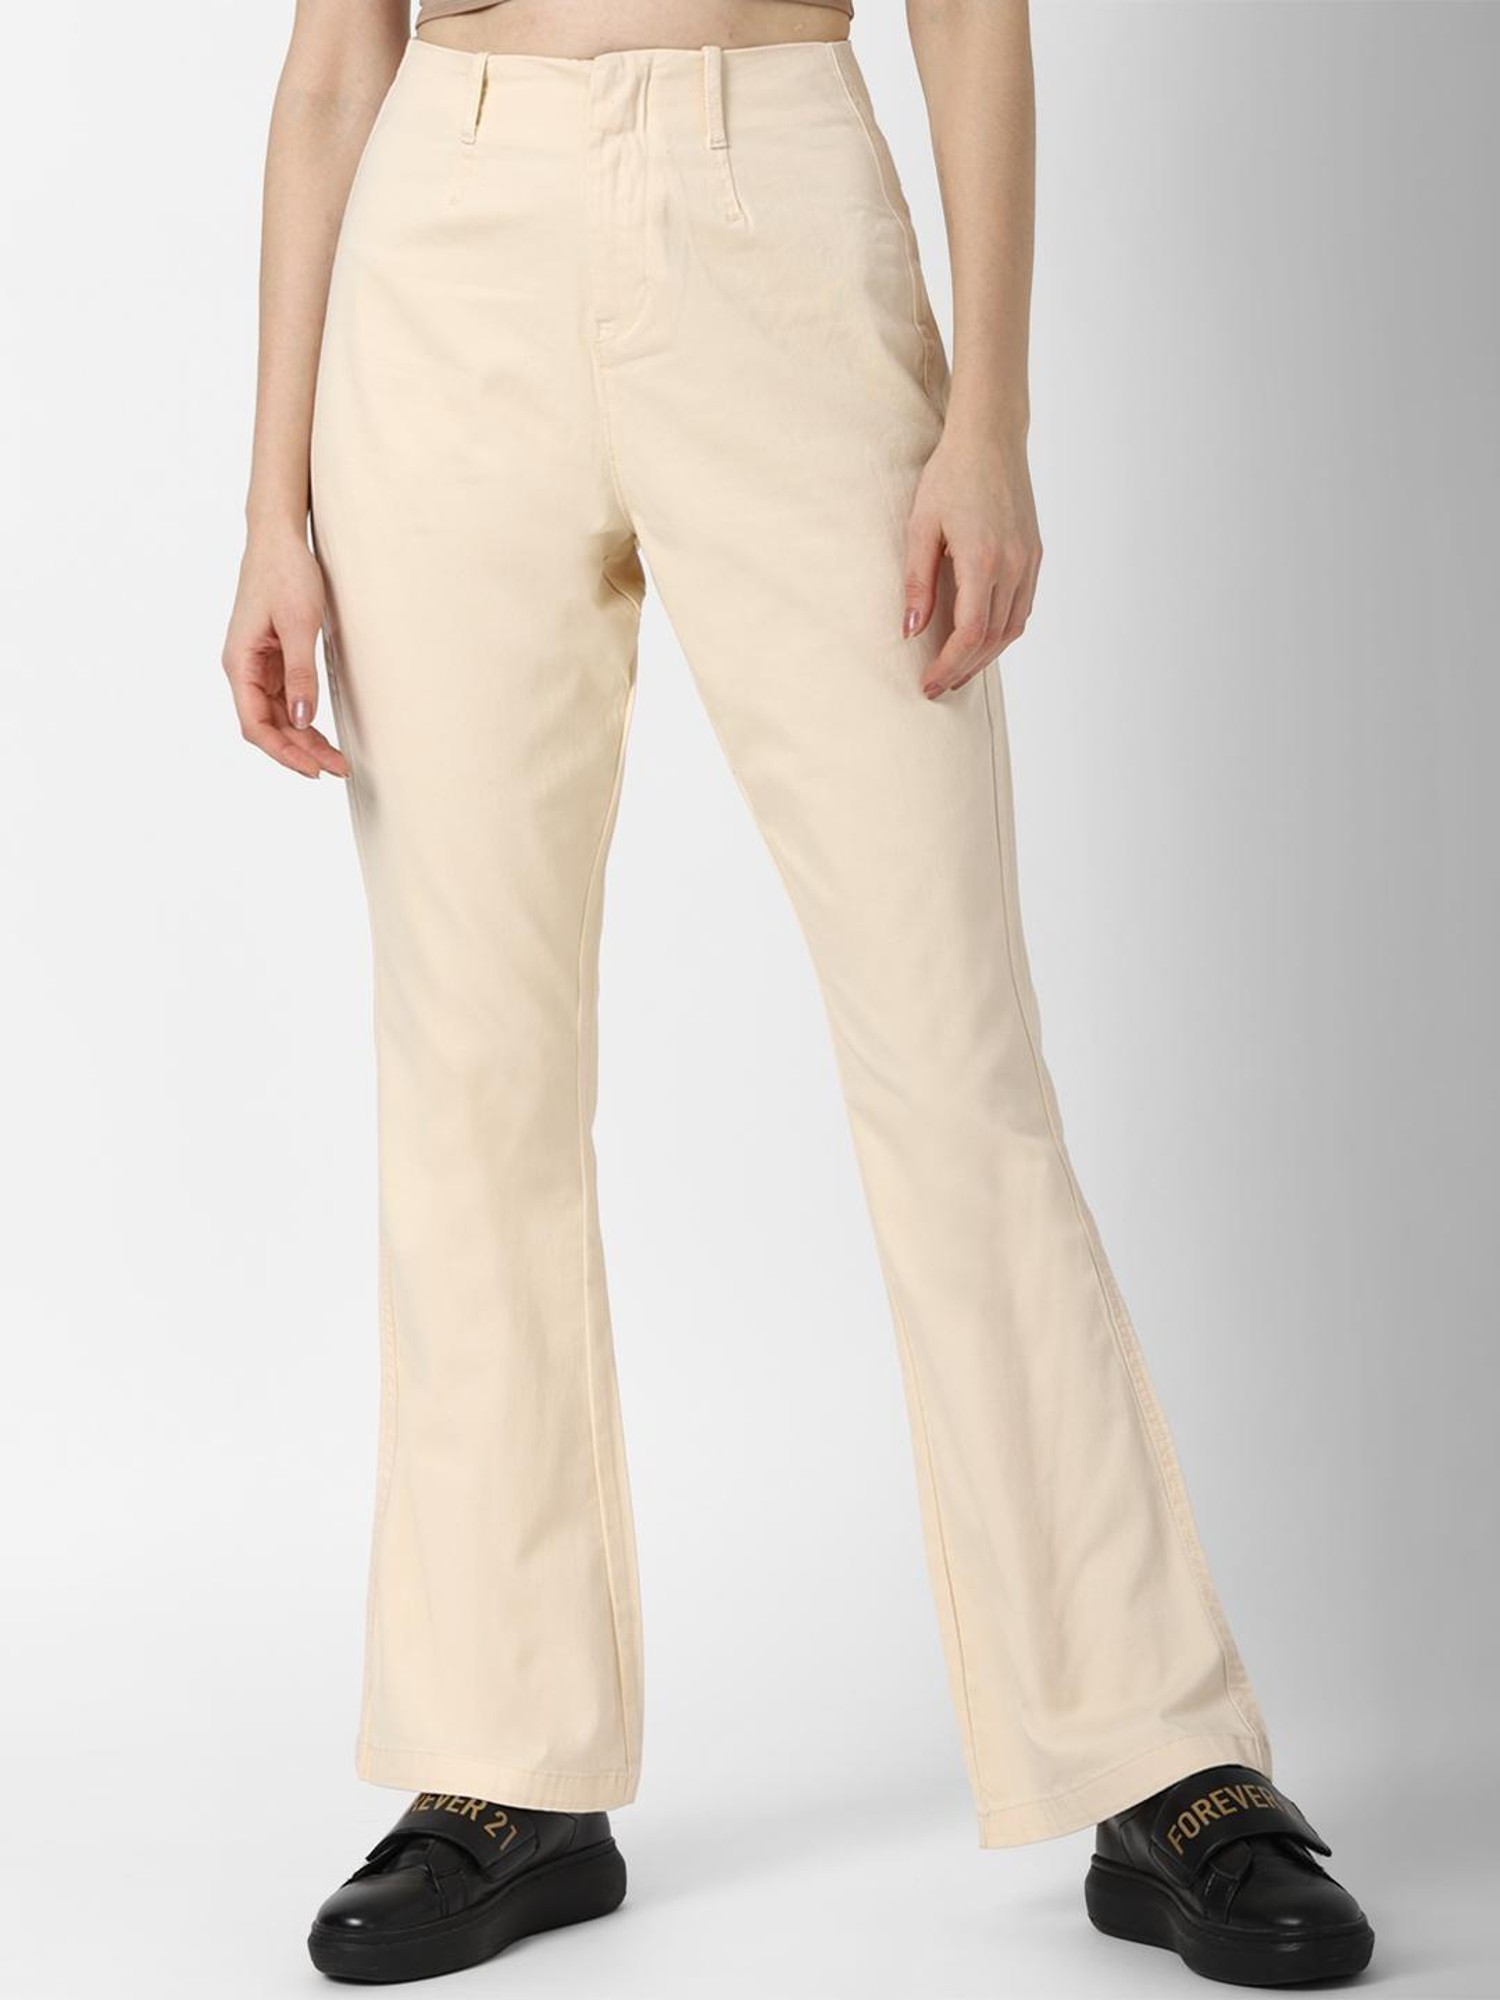 Buy Blue  Pink Trousers  Pants for Women by The Dry State Online   Ajiocom